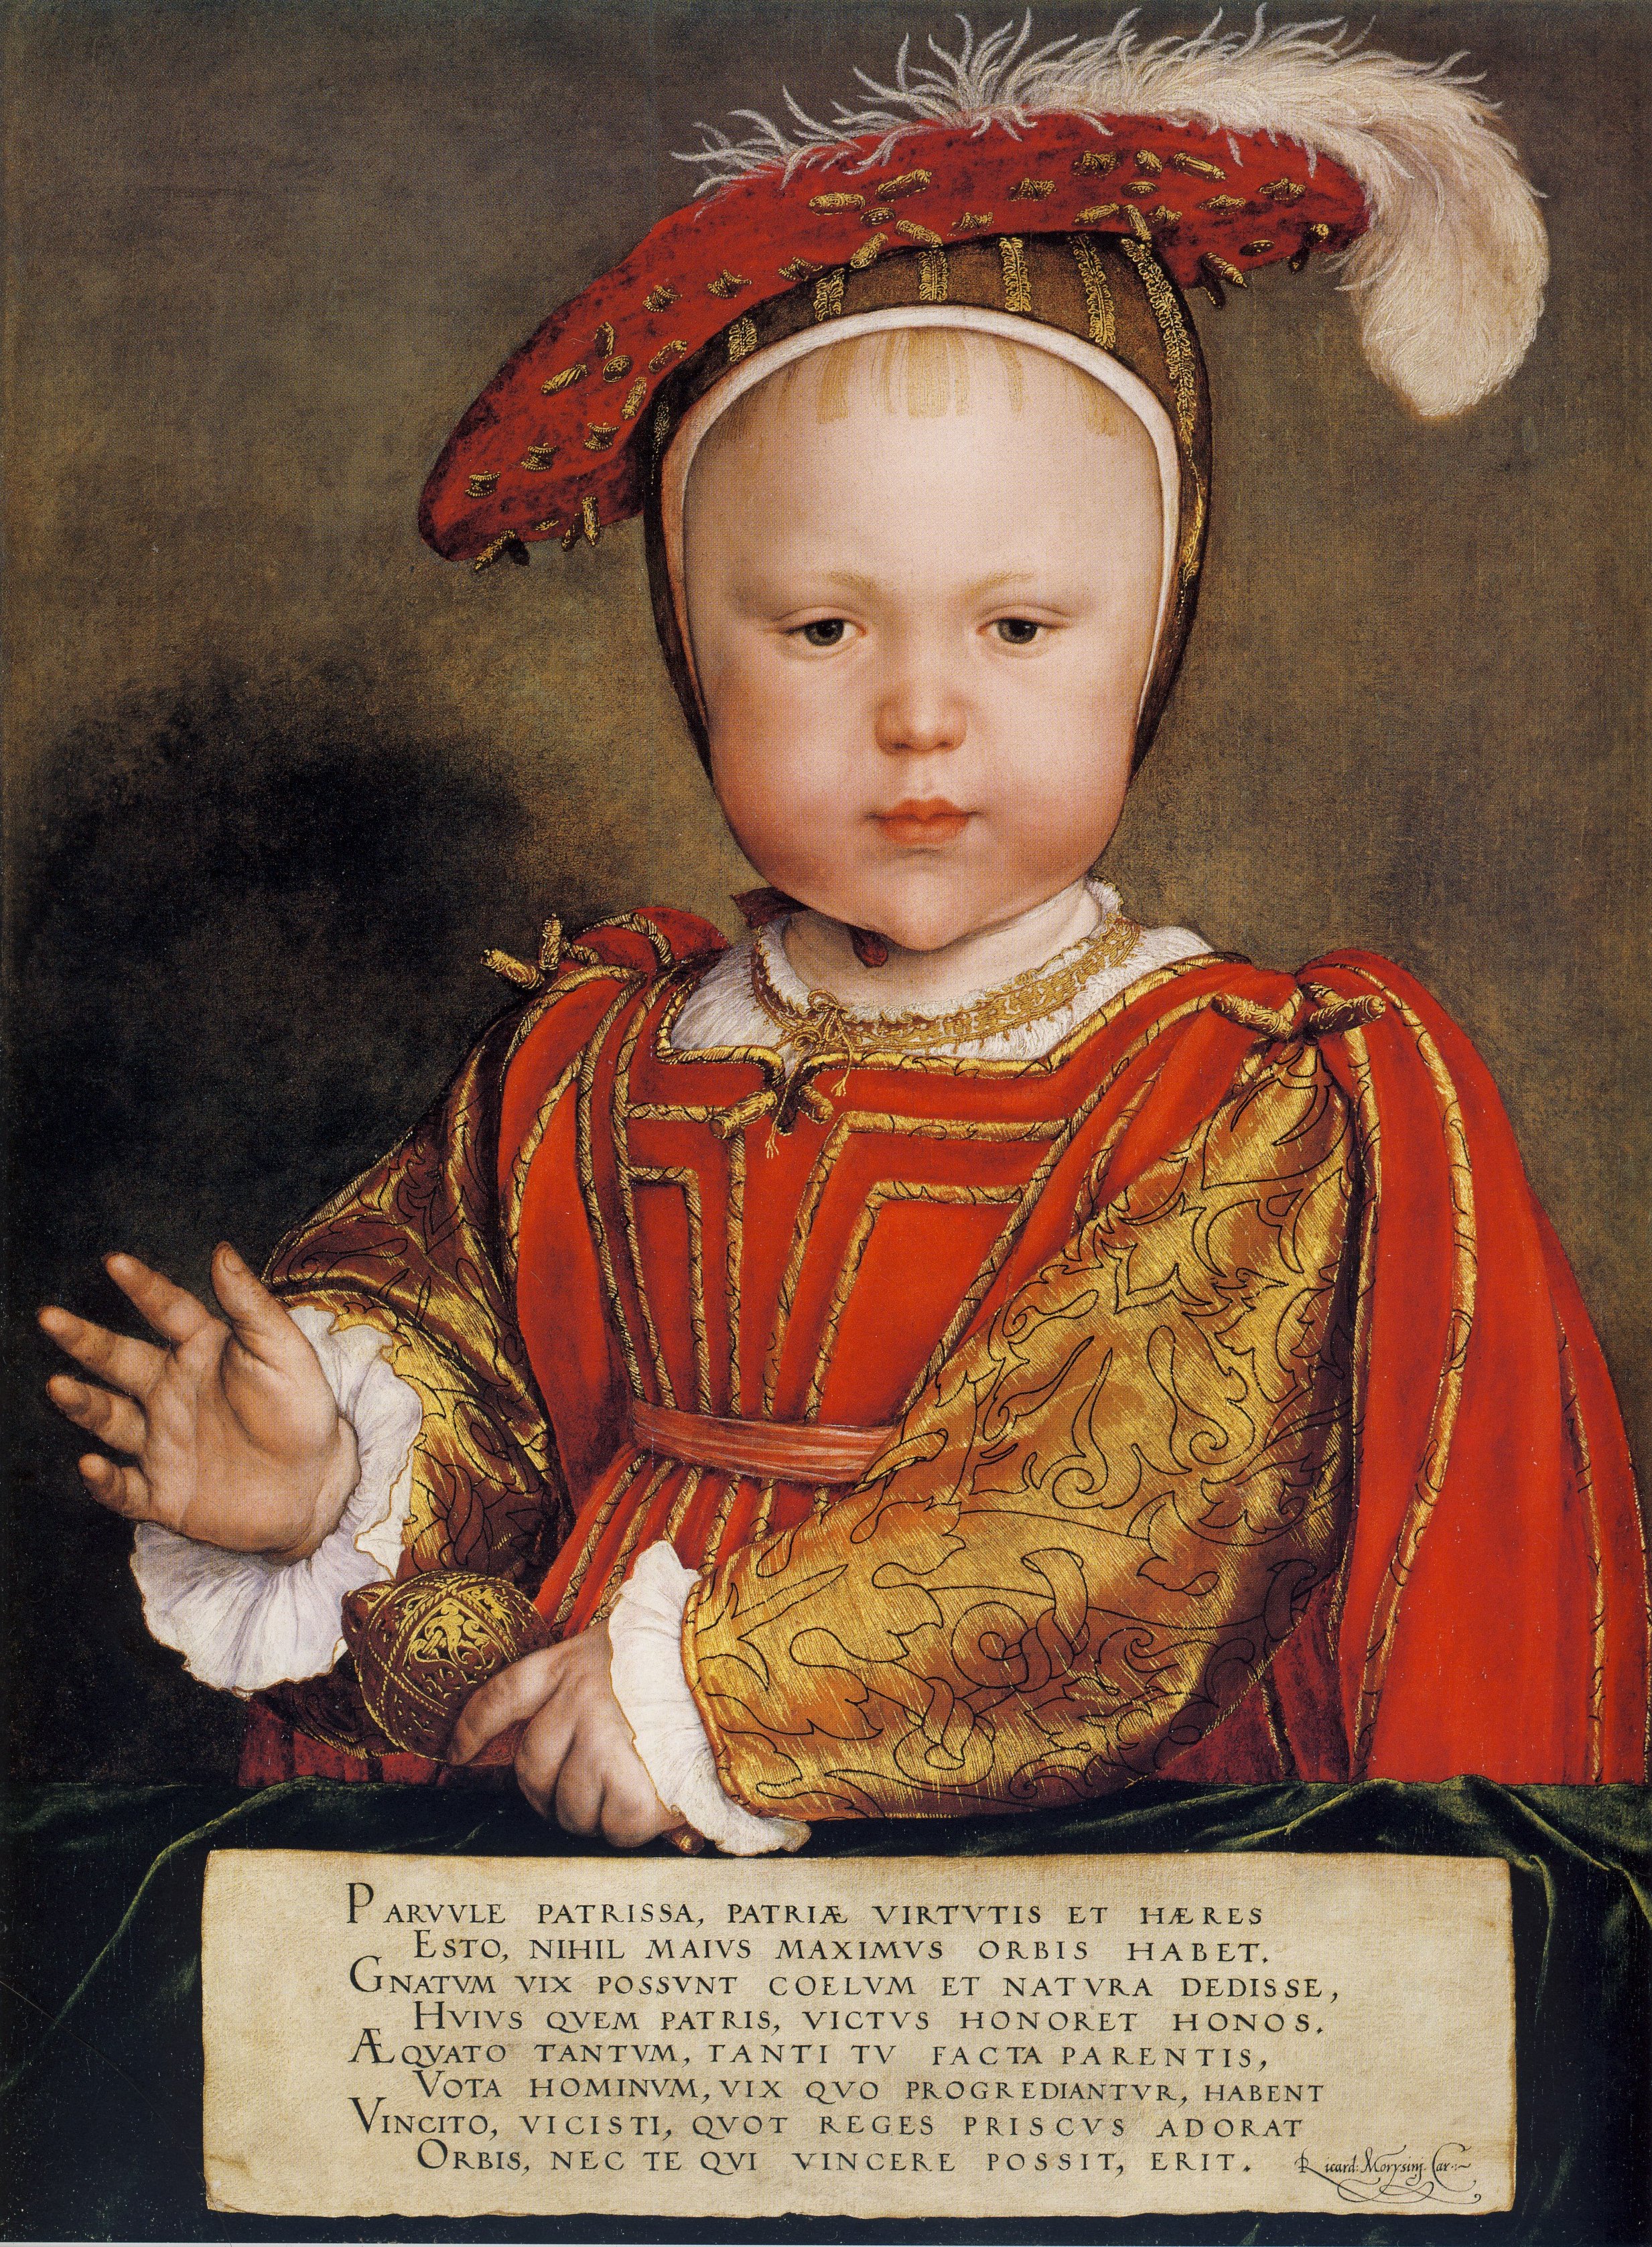 Edward VI as a Child by Hans Holbein the Younger - probably 1538 - 68 x 44 cm National Gallery of Art